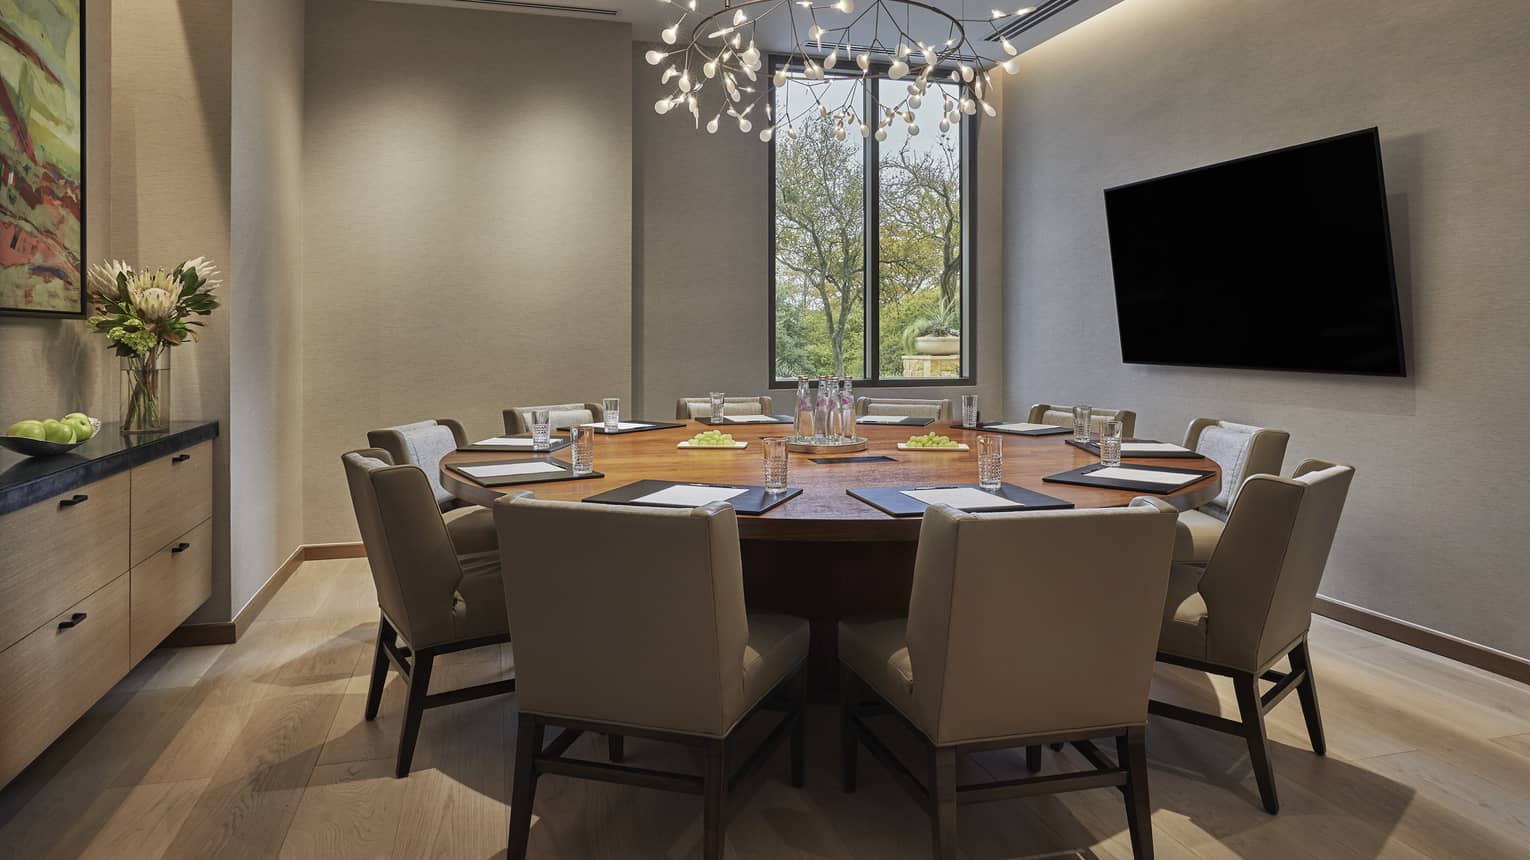 Shoal Creek meeting room with small round table, large chairs, screen